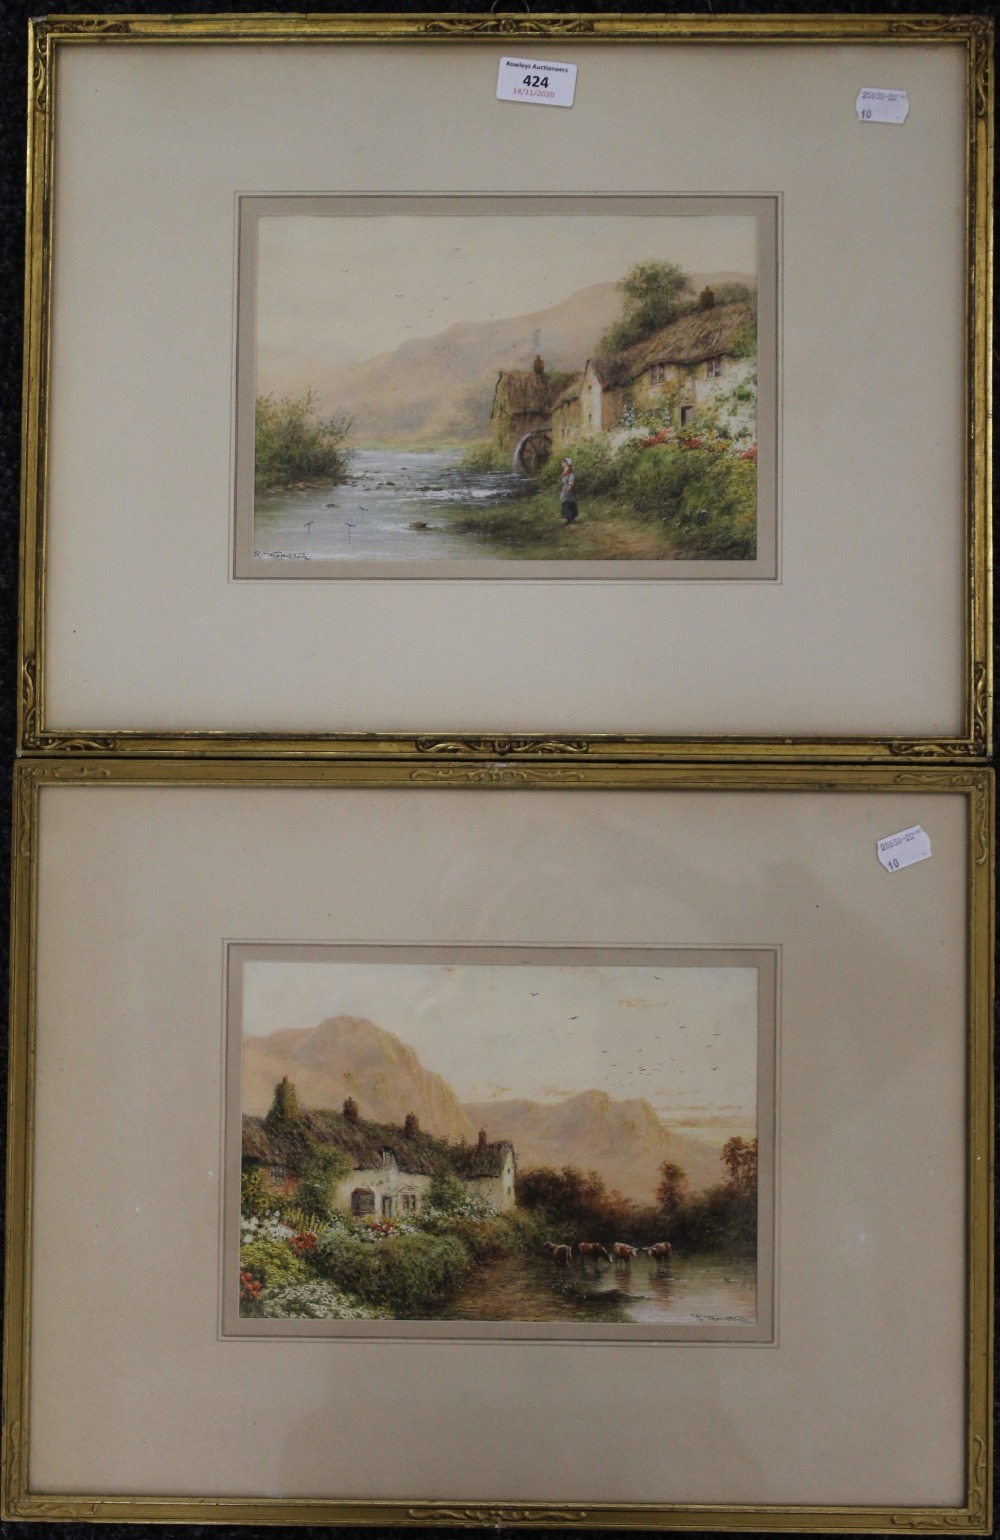 R THORNTON, a pair of watercolours, Rural Scenes, framed and glazed. Each 24.5 x 17 cm.